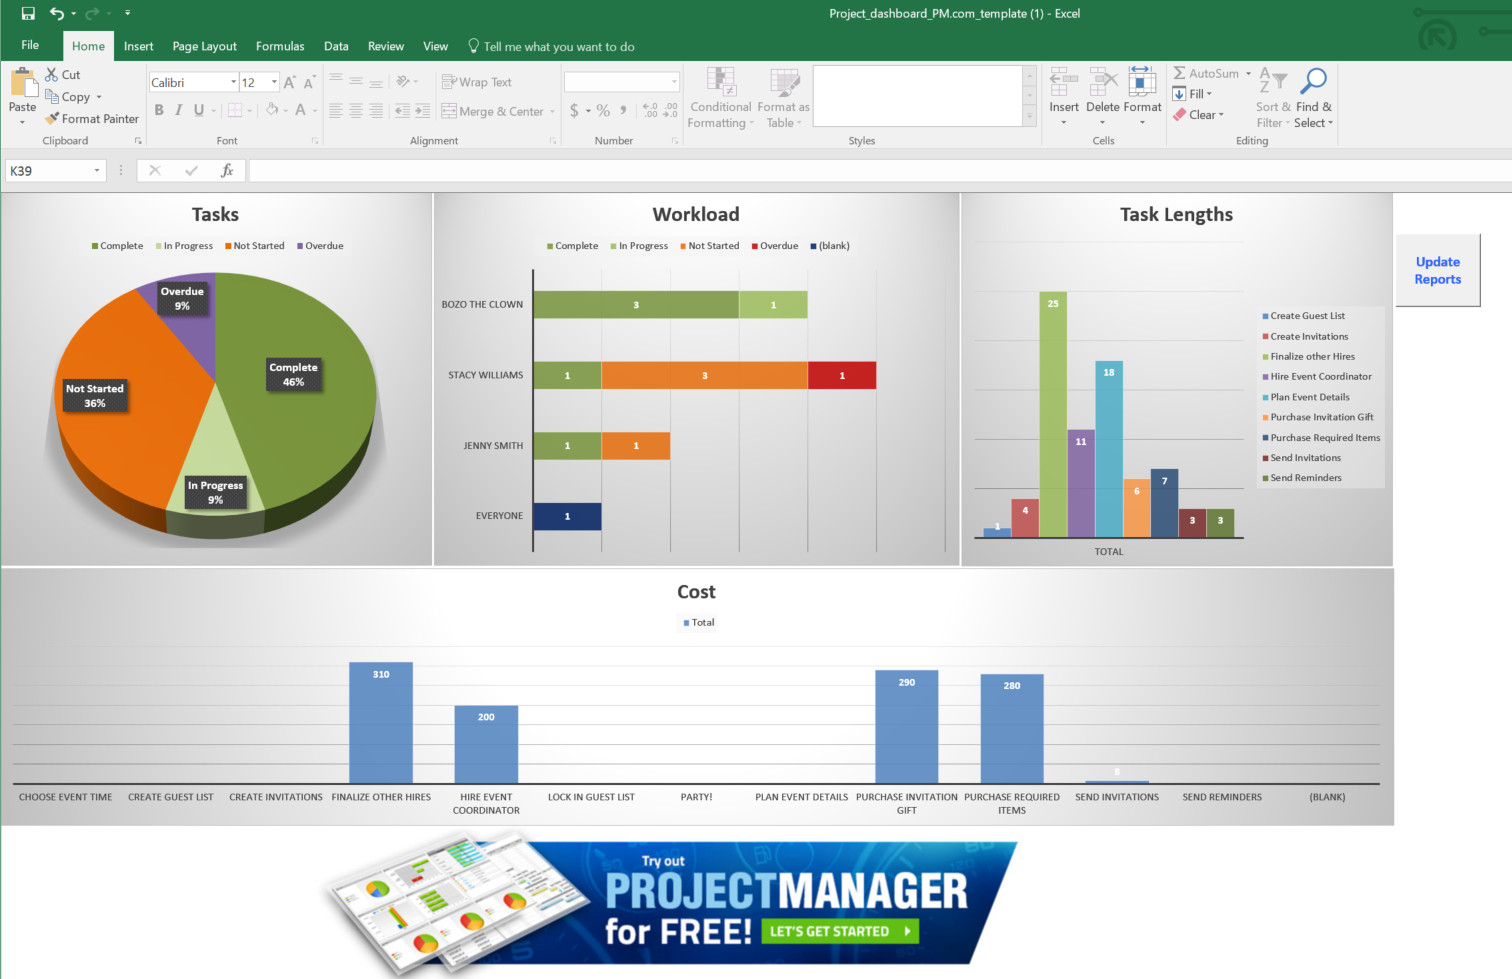 Guide To Excel Project Management - Projectmanager Throughout Project Management Reporting Templates For Status